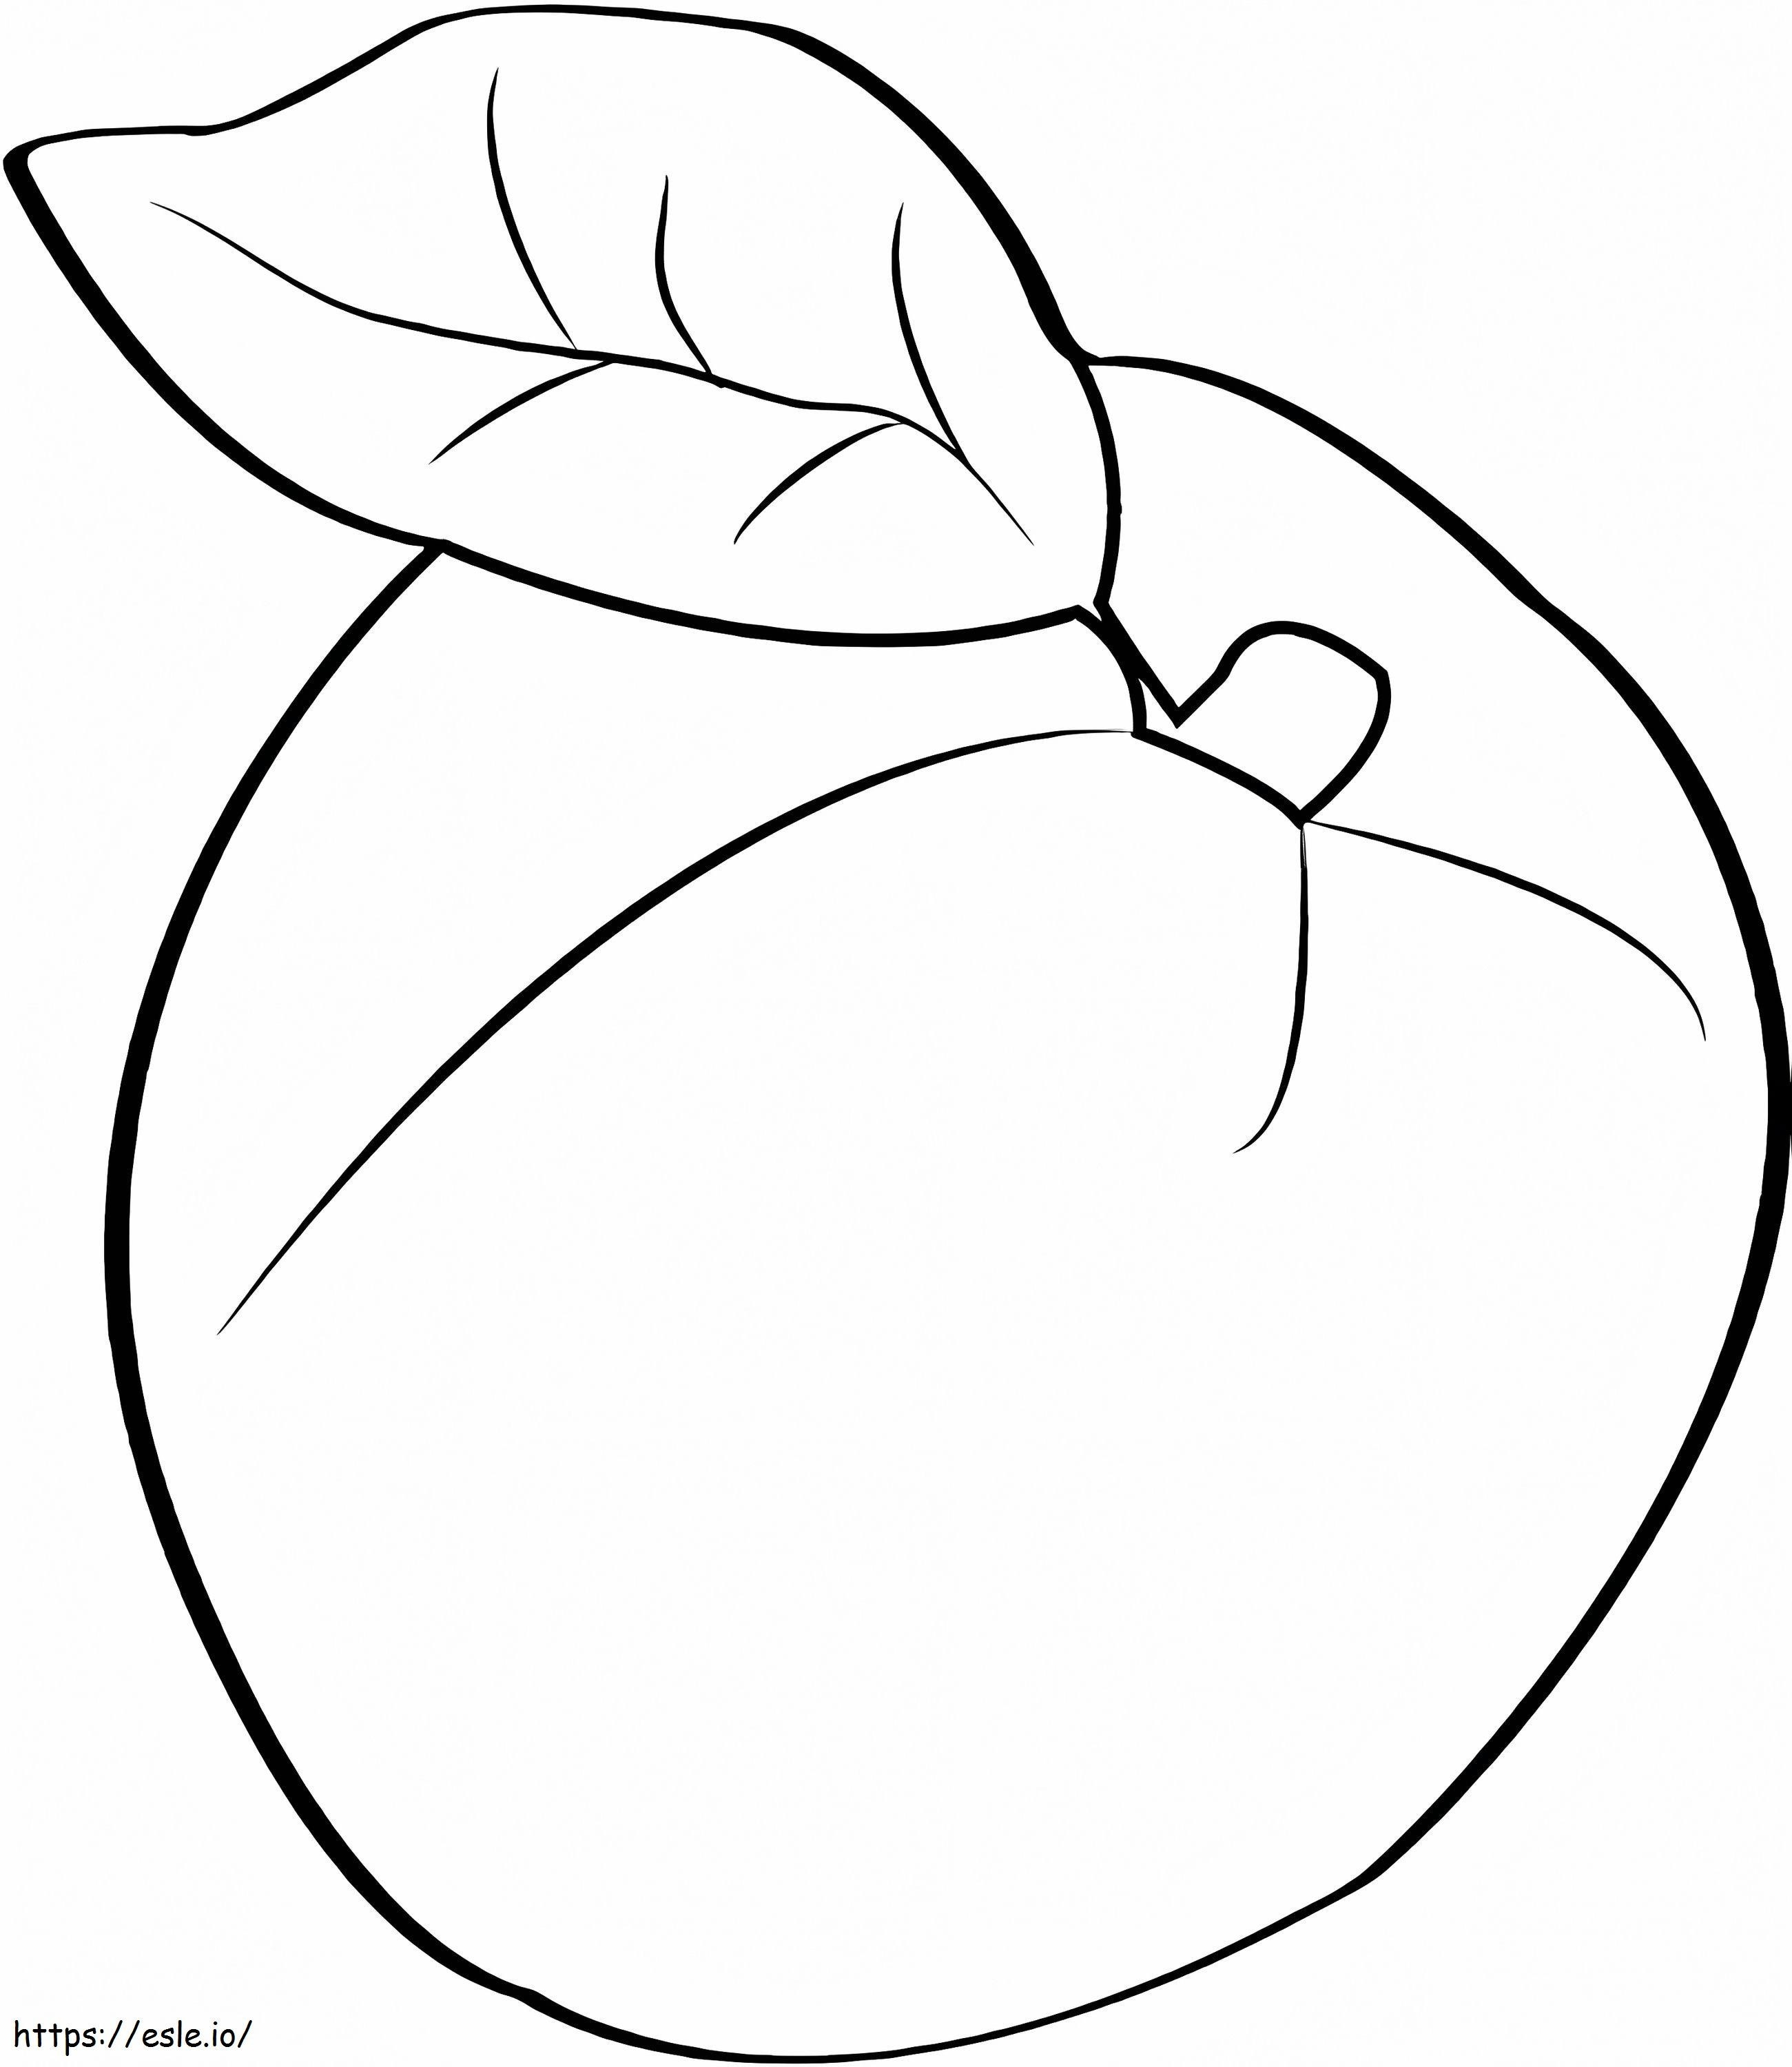 Apricot 4 coloring page